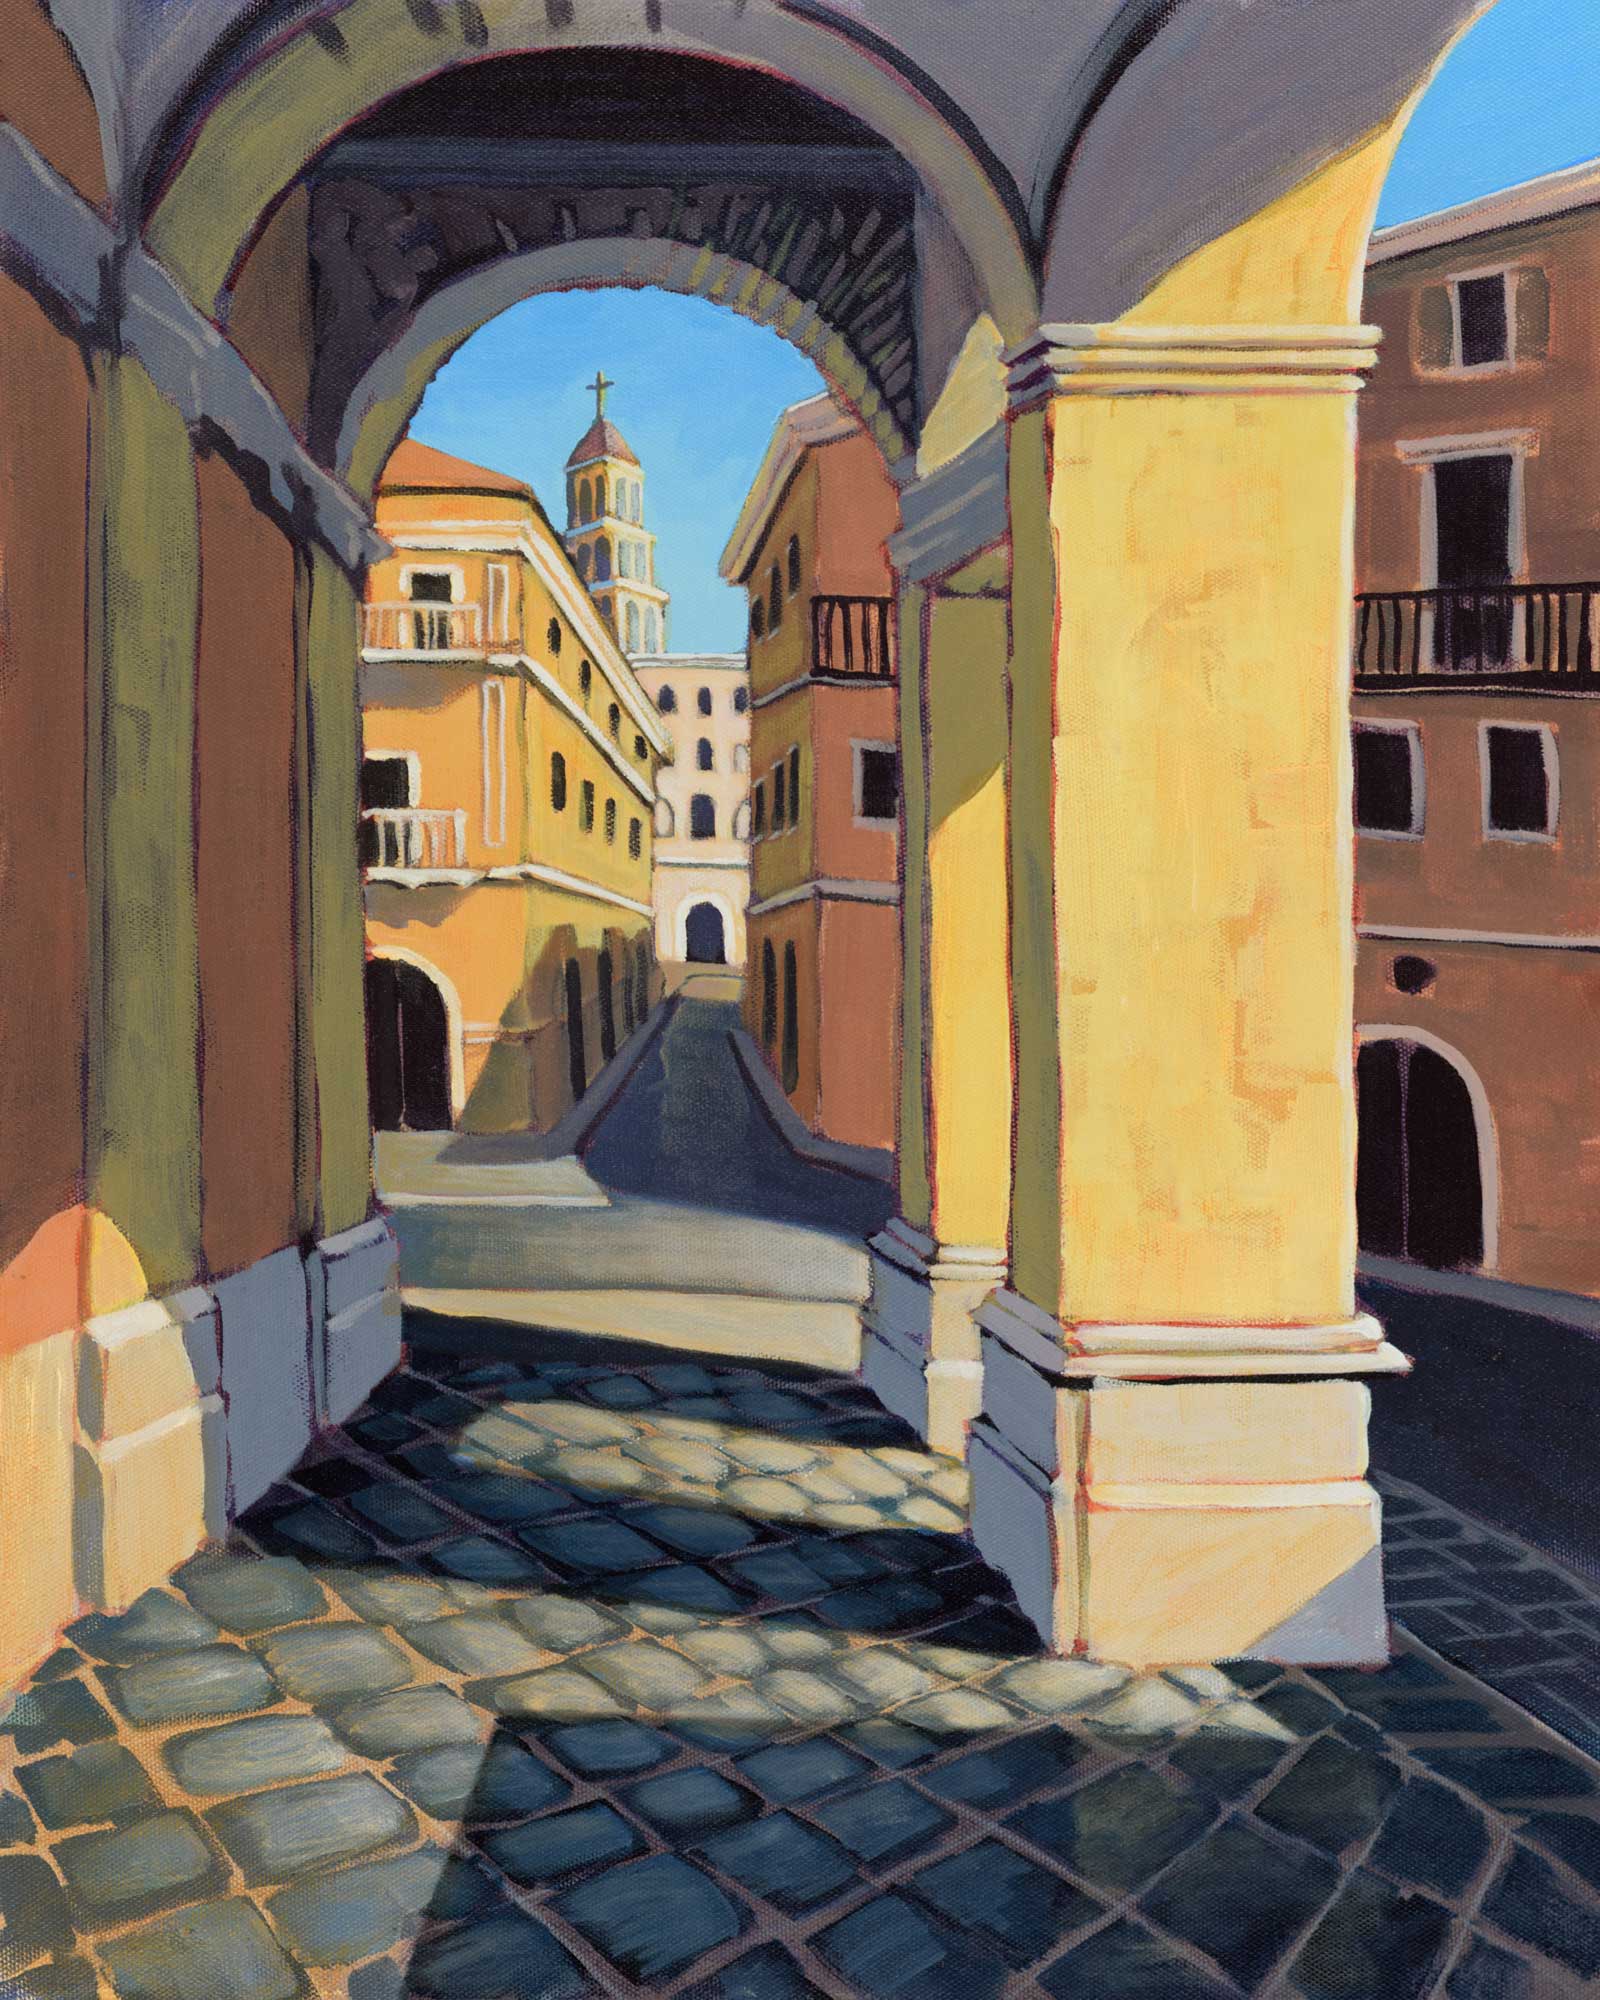 Plein air painting of antique archways in a courtyard in the town of Gaeta, Italy